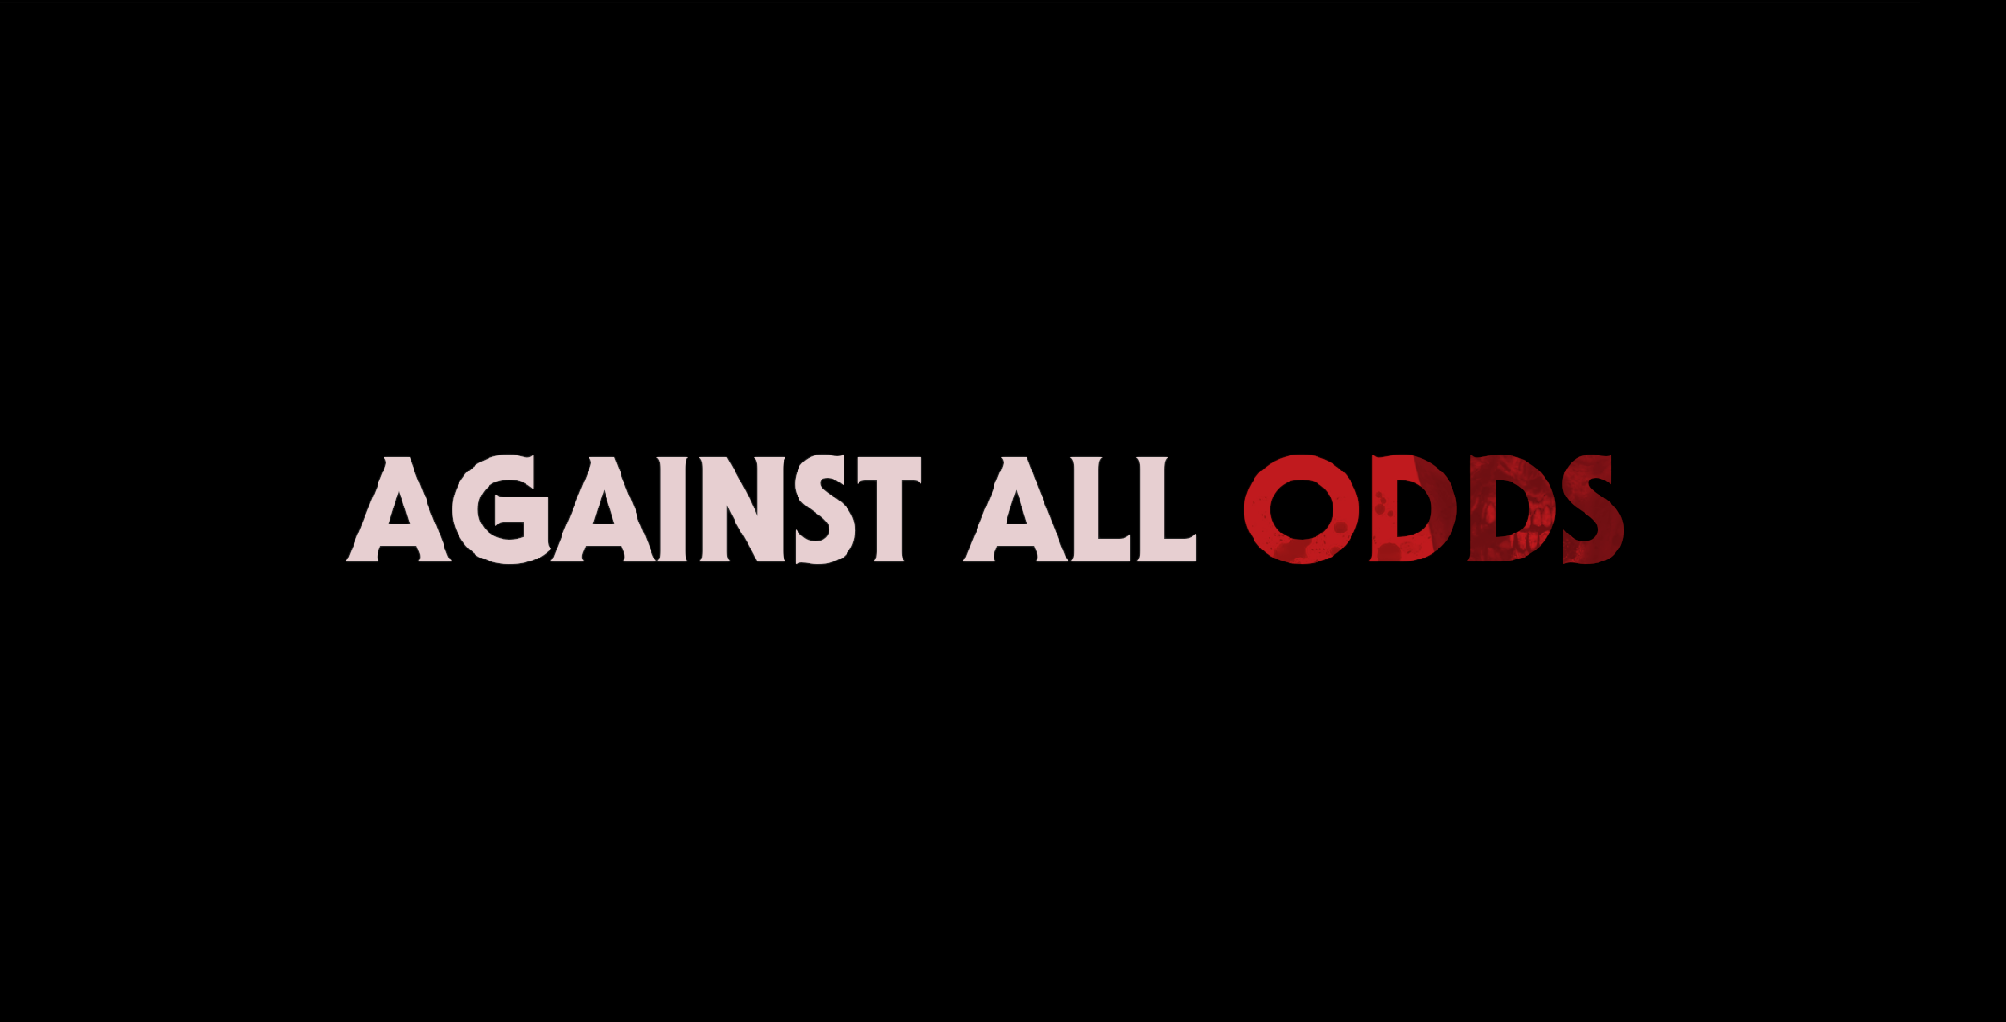 Against All Odds on Steam